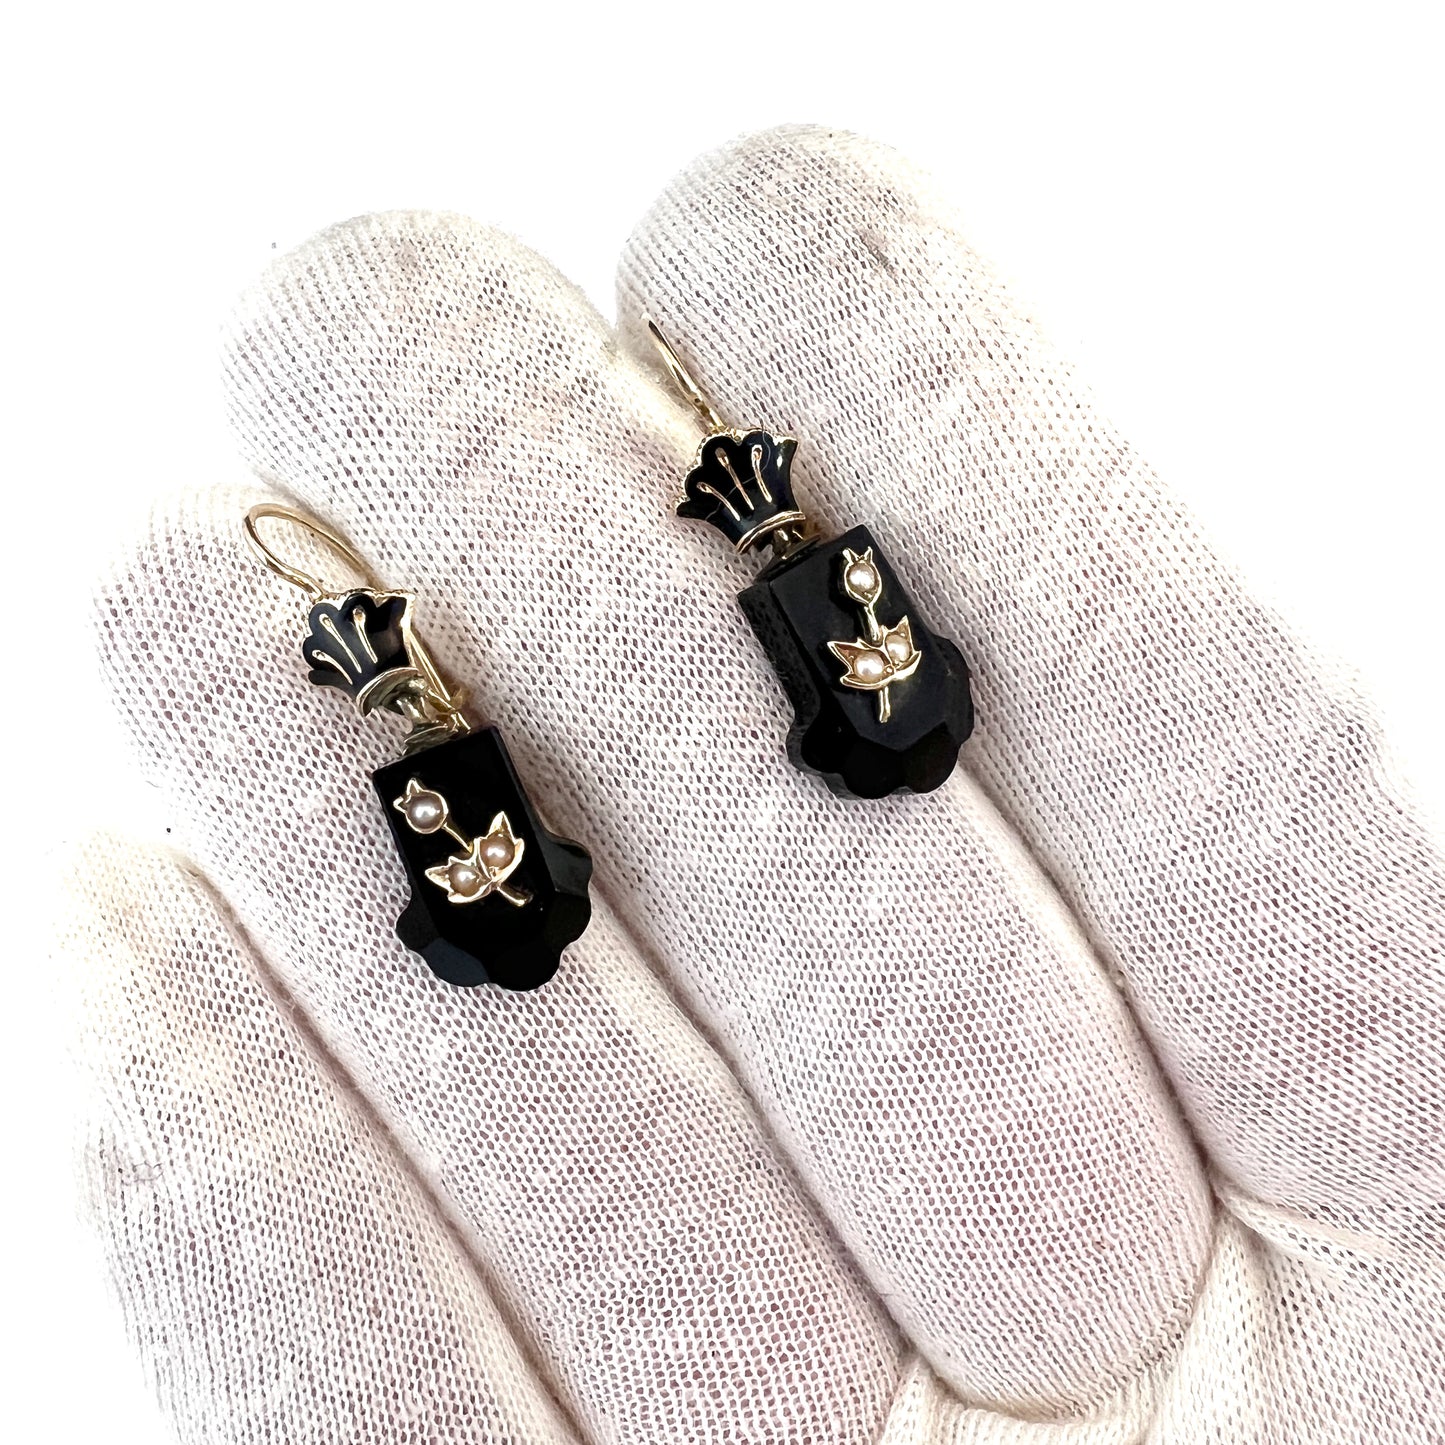 Antique Victorian 14k Gold Onyx Enamel Seed Pearl Mourning Earrings.